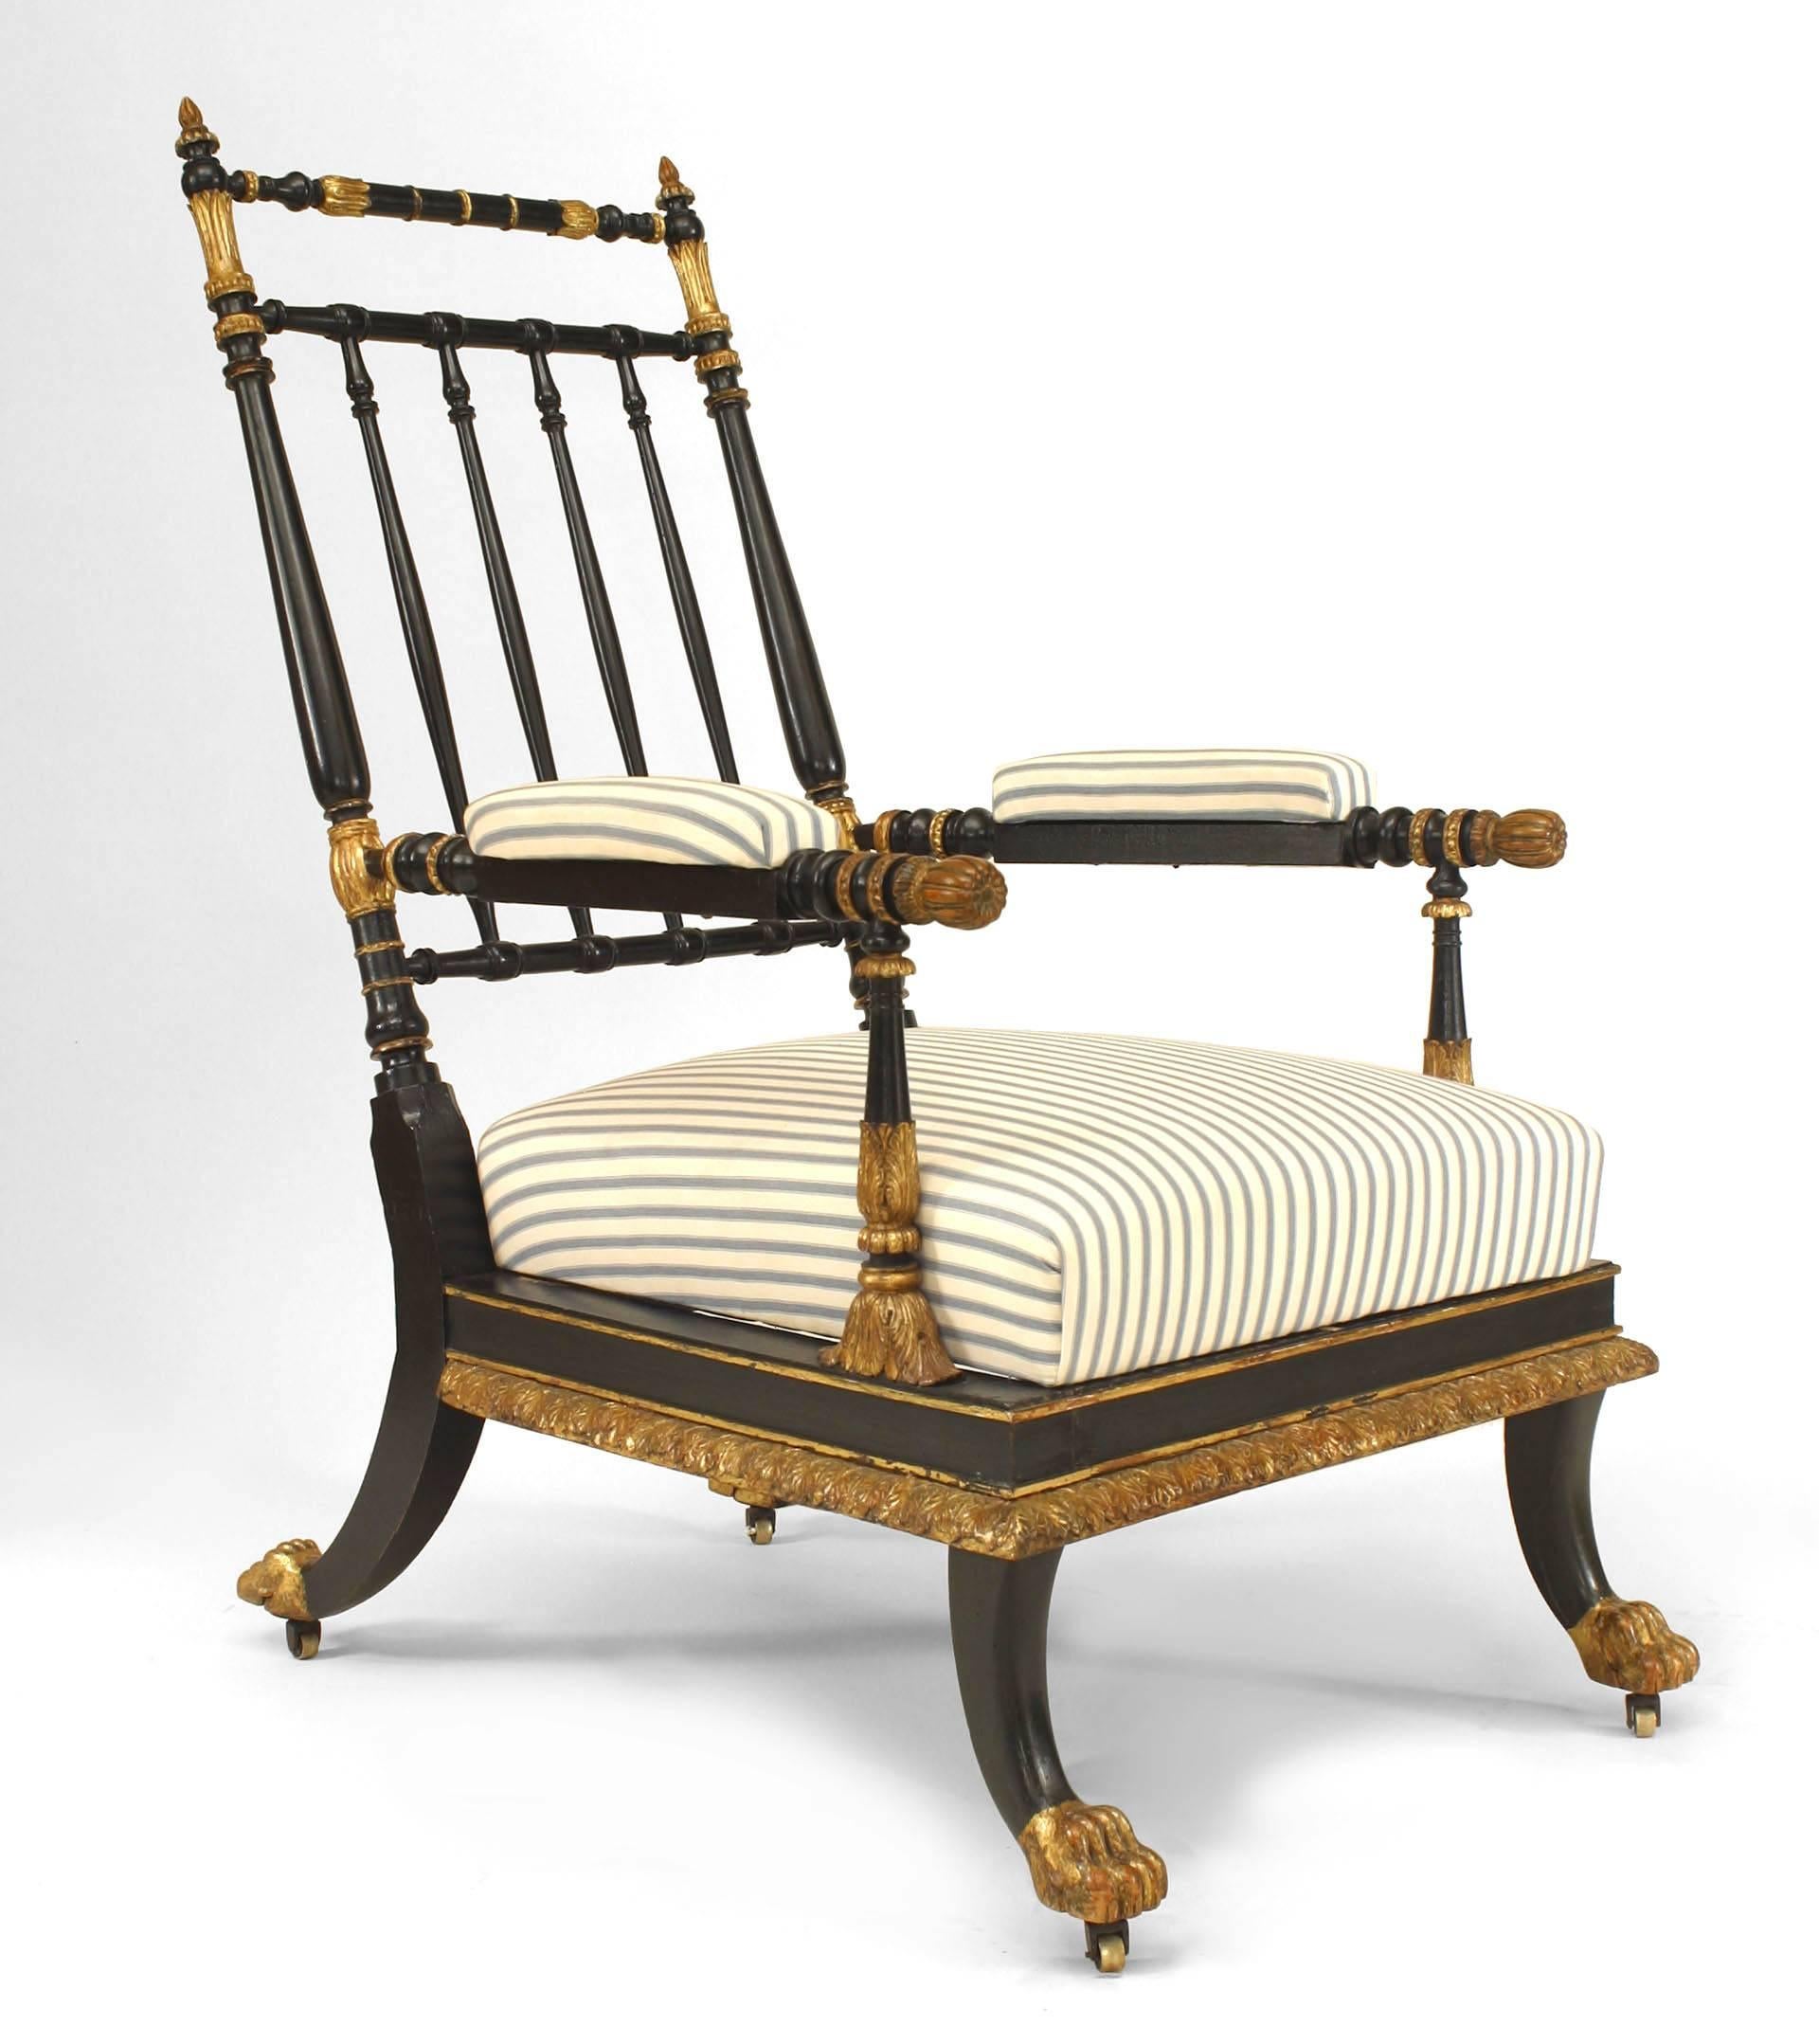 Early nineteenth century Continental Austrian ebonized and gilt trimmed open armchair with a spindle design back and gilt foliate relief apron over sabre form legs with upholstered seat and arm rests.